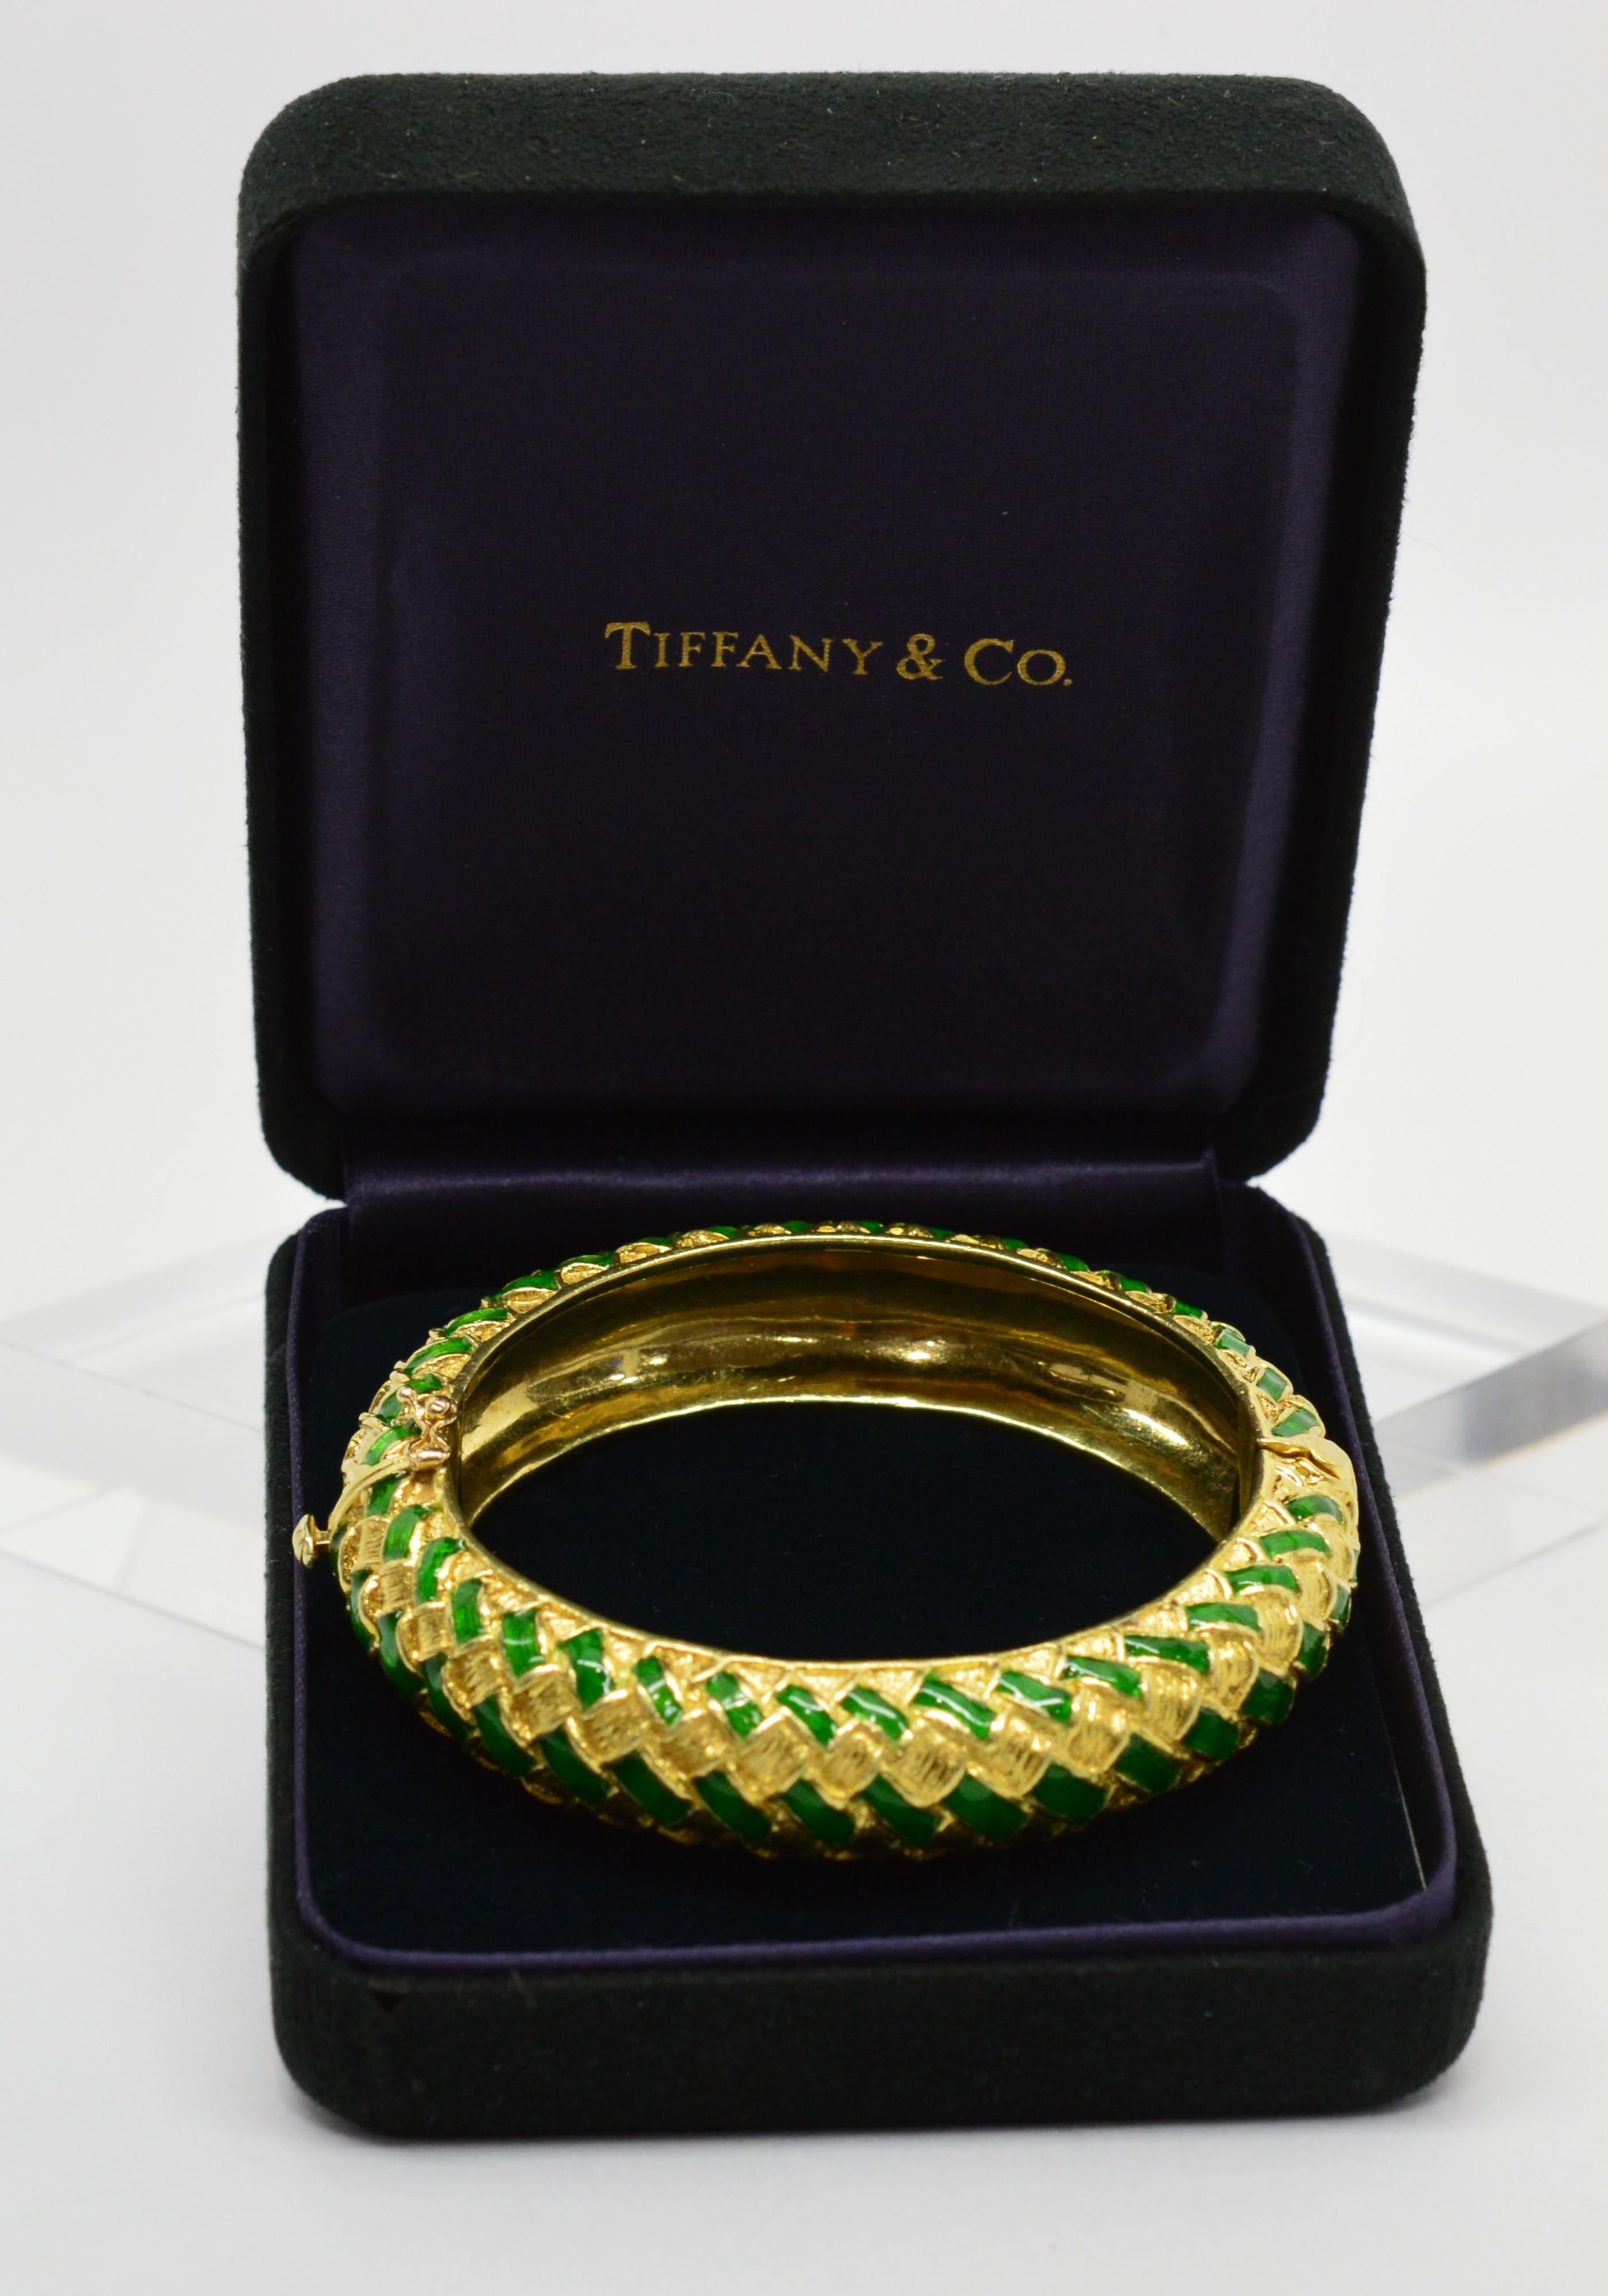 Retro 1960's and all the rage, this artfully distinctive bracelet by Tiffany & Co. integrates vibrant green enamel and bright eighteen karat 18k yellow gold to create this fabulous basket weave patterned bangle. Generously bold with a width of